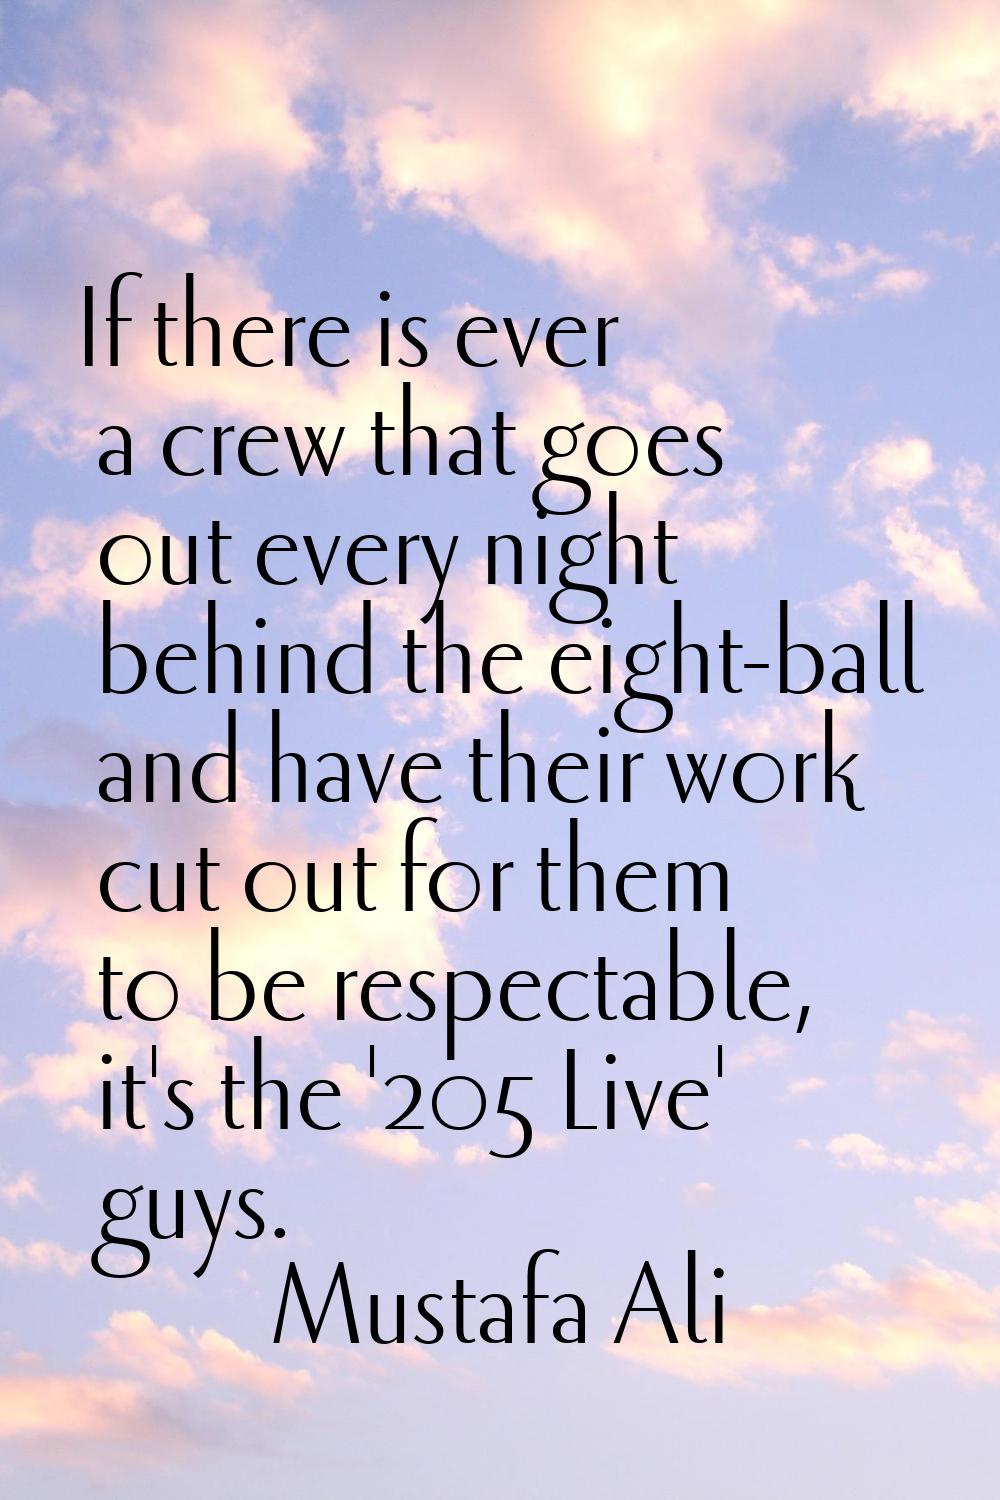 If there is ever a crew that goes out every night behind the eight-ball and have their work cut out